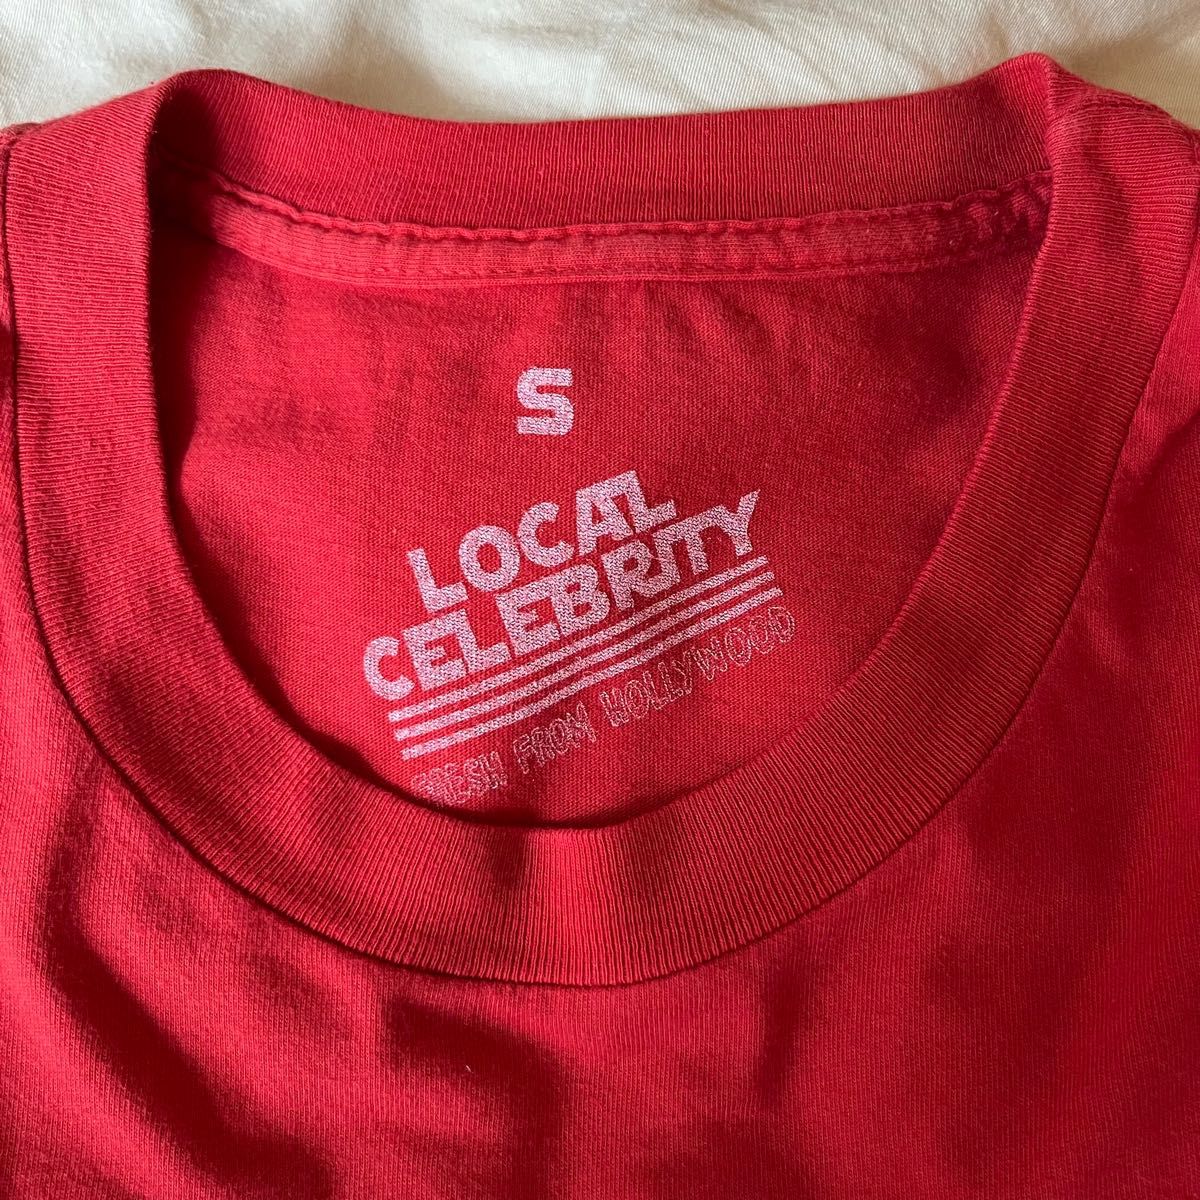 Made in USA！LOCAL CELEBRITY  Tシャツ　